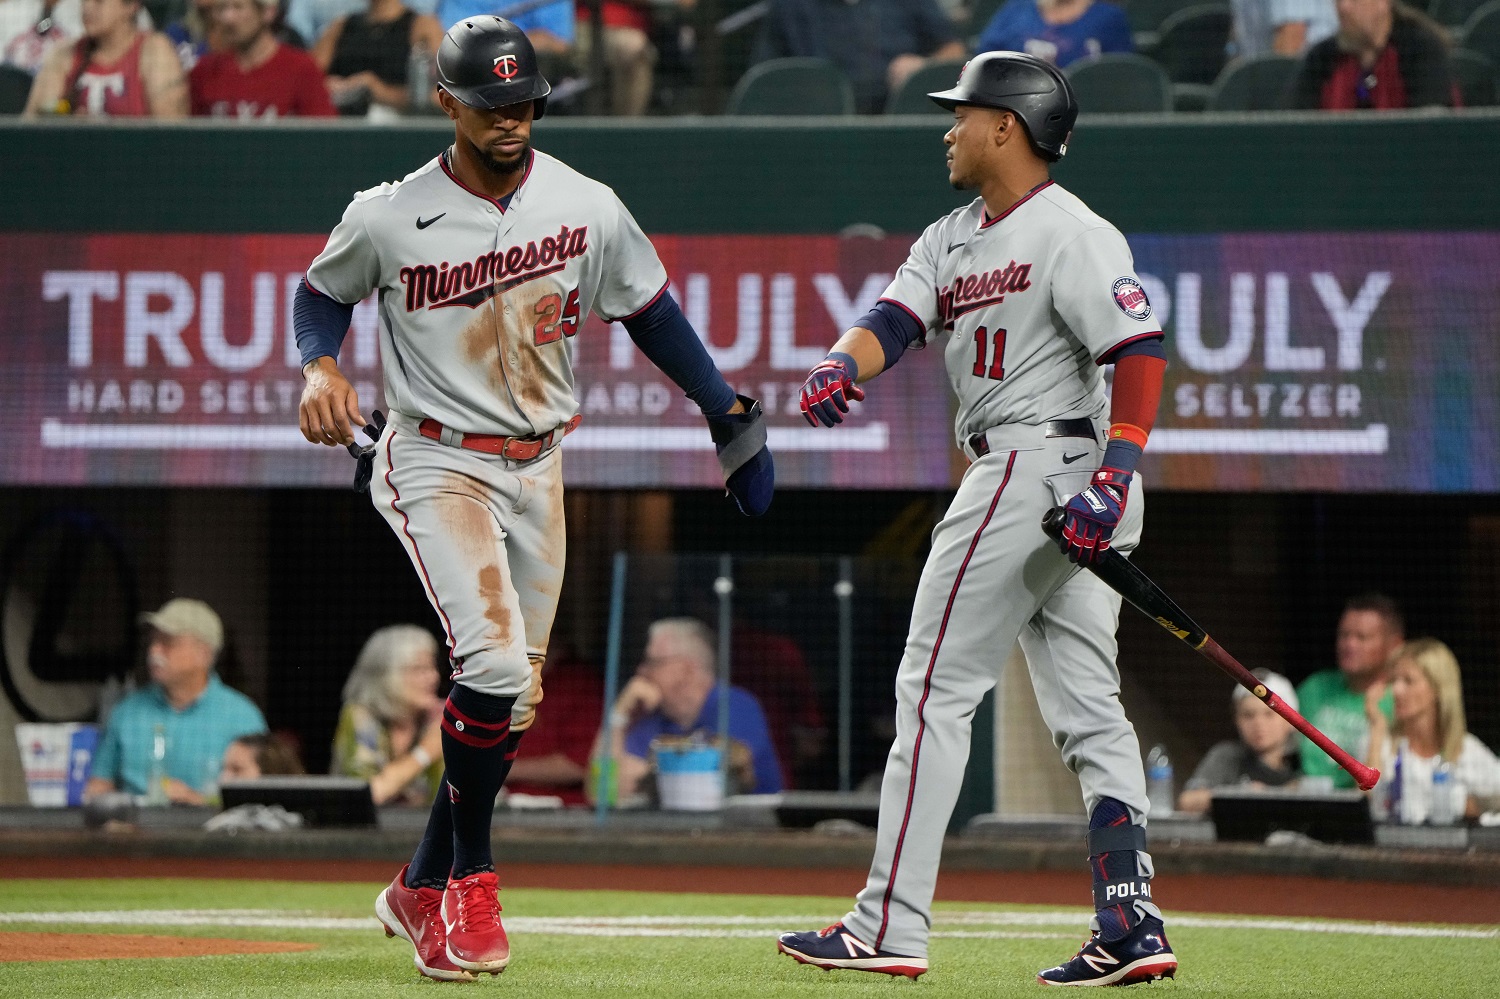 The Twins Will Hit Lefties Just Fine - Twins - Twins Daily